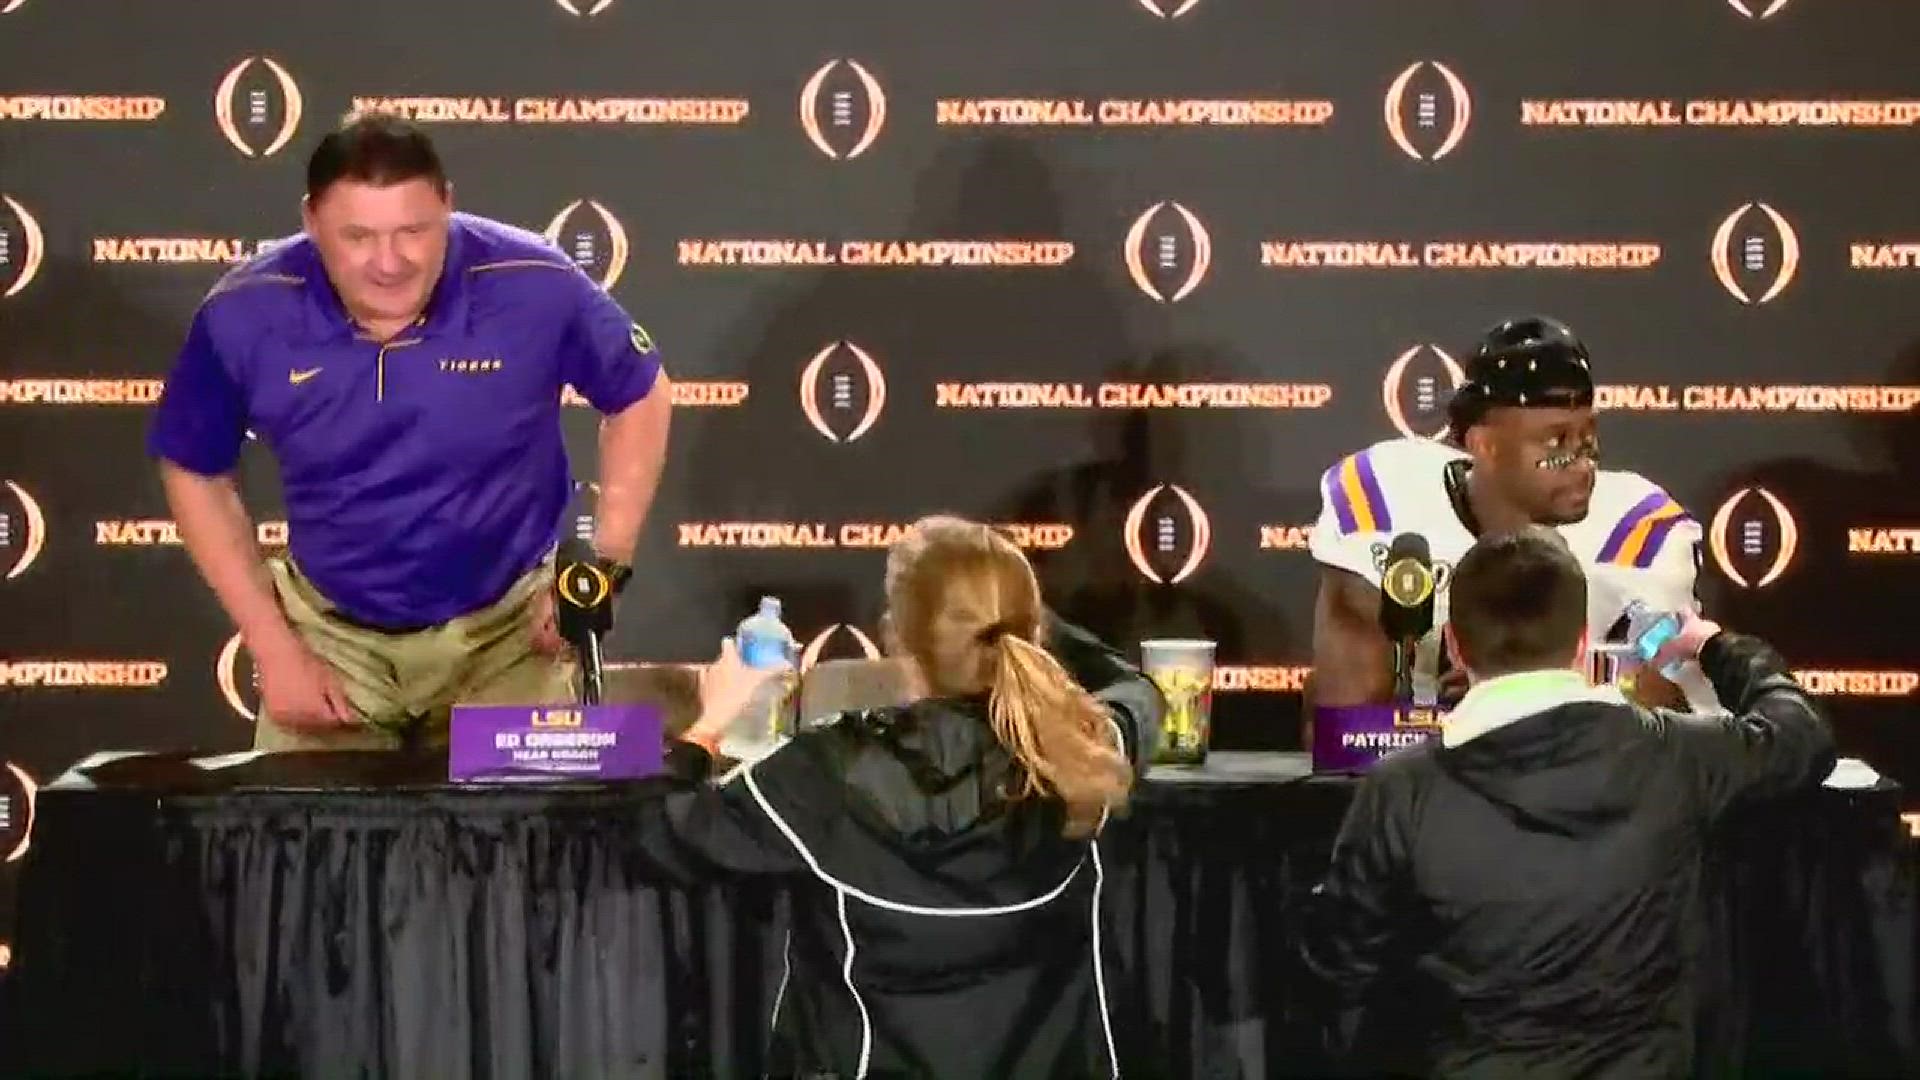 The perfect season is complete. The LSU Tigers are national champions once again. Here's what Orgeron, Burrow and Queen had to say following the historic game.